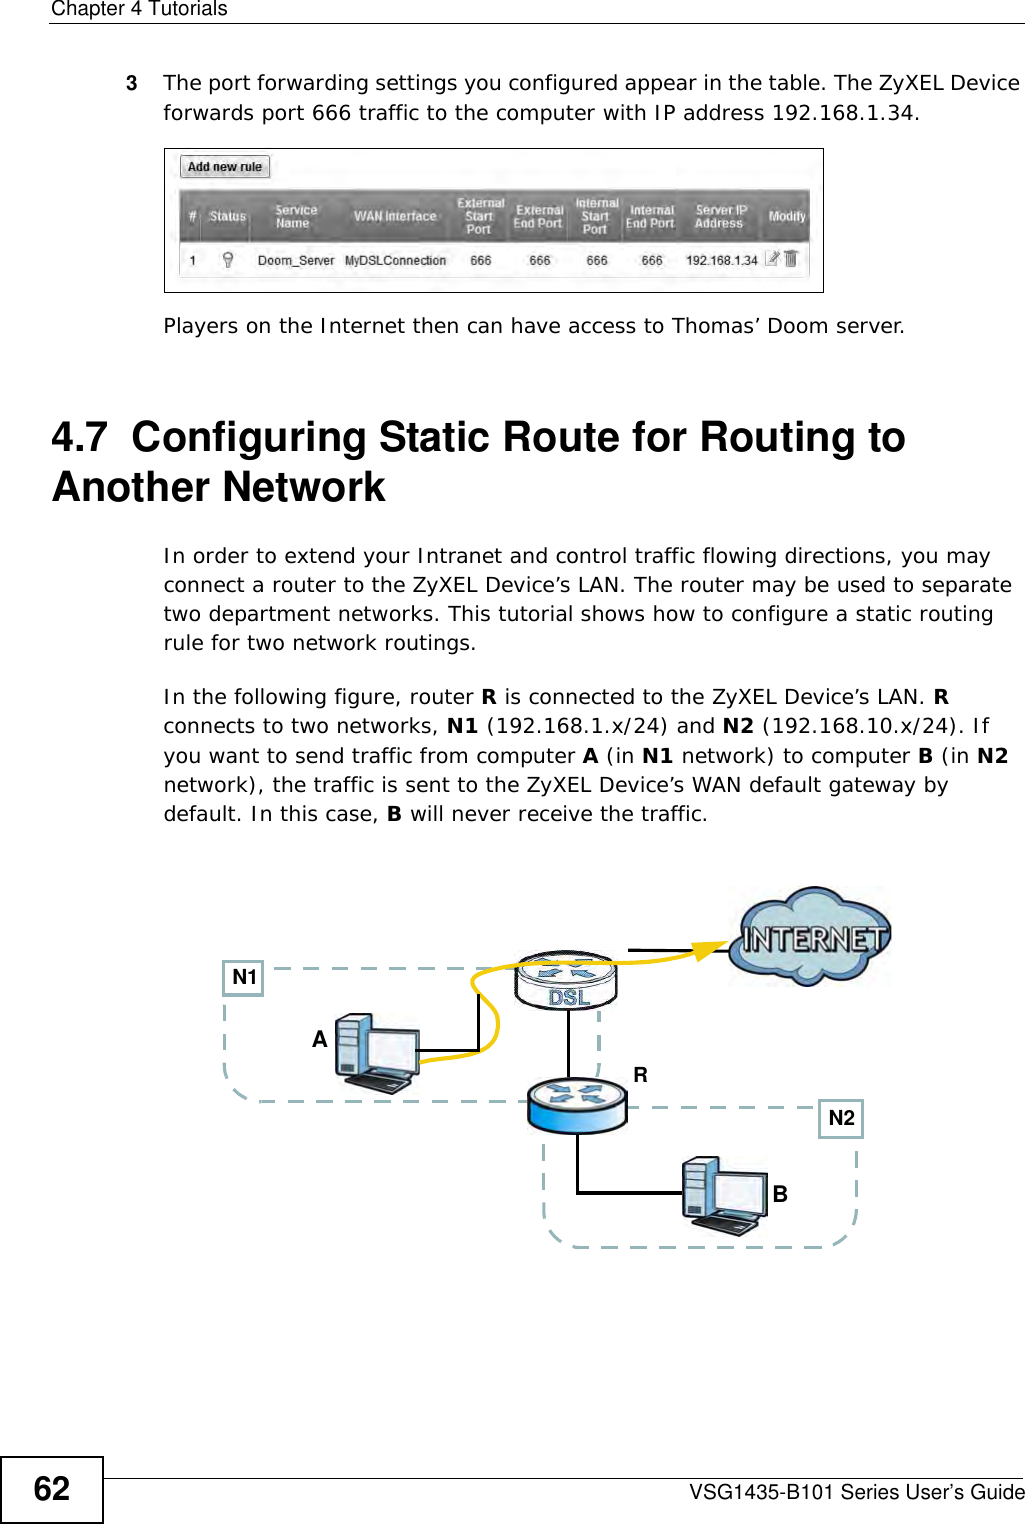 Chapter 4 TutorialsVSG1435-B101 Series User’s Guide623The port forwarding settings you configured appear in the table. The ZyXEL Device forwards port 666 traffic to the computer with IP address 192.168.1.34.Players on the Internet then can have access to Thomas’ Doom server.4.7  Configuring Static Route for Routing to Another NetworkIn order to extend your Intranet and control traffic flowing directions, you may connect a router to the ZyXEL Device’s LAN. The router may be used to separate two department networks. This tutorial shows how to configure a static routing rule for two network routings.In the following figure, router R is connected to the ZyXEL Device’s LAN. R connects to two networks, N1 (192.168.1.x/24) and N2 (192.168.10.x/24). If you want to send traffic from computer A (in N1 network) to computer B (in N2 network), the traffic is sent to the ZyXEL Device’s WAN default gateway by default. In this case, B will never receive the traffic.N2BN1AR